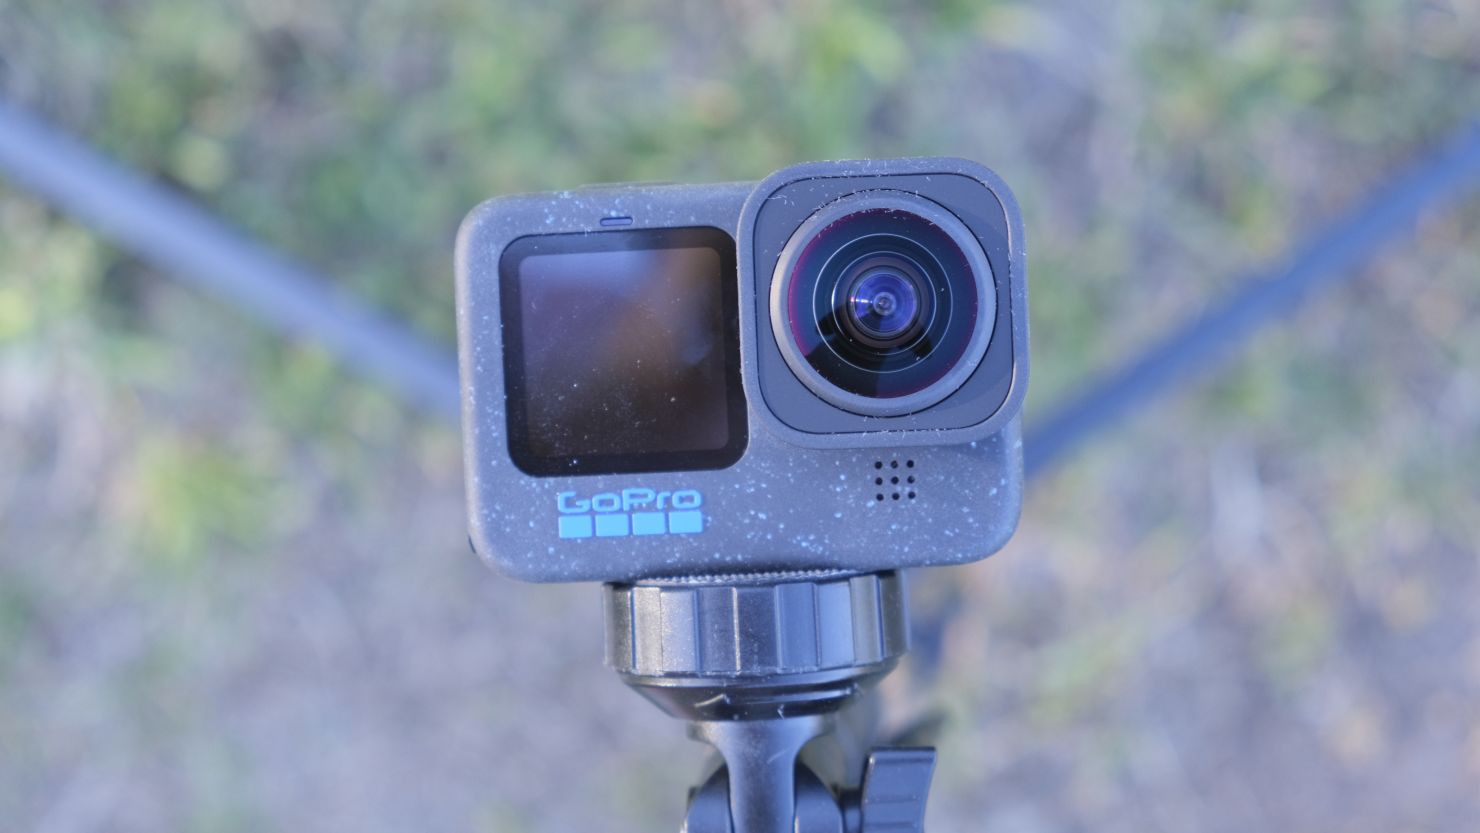 GoPro HERO7 Black Review: One of the Best Action Cameras Out There